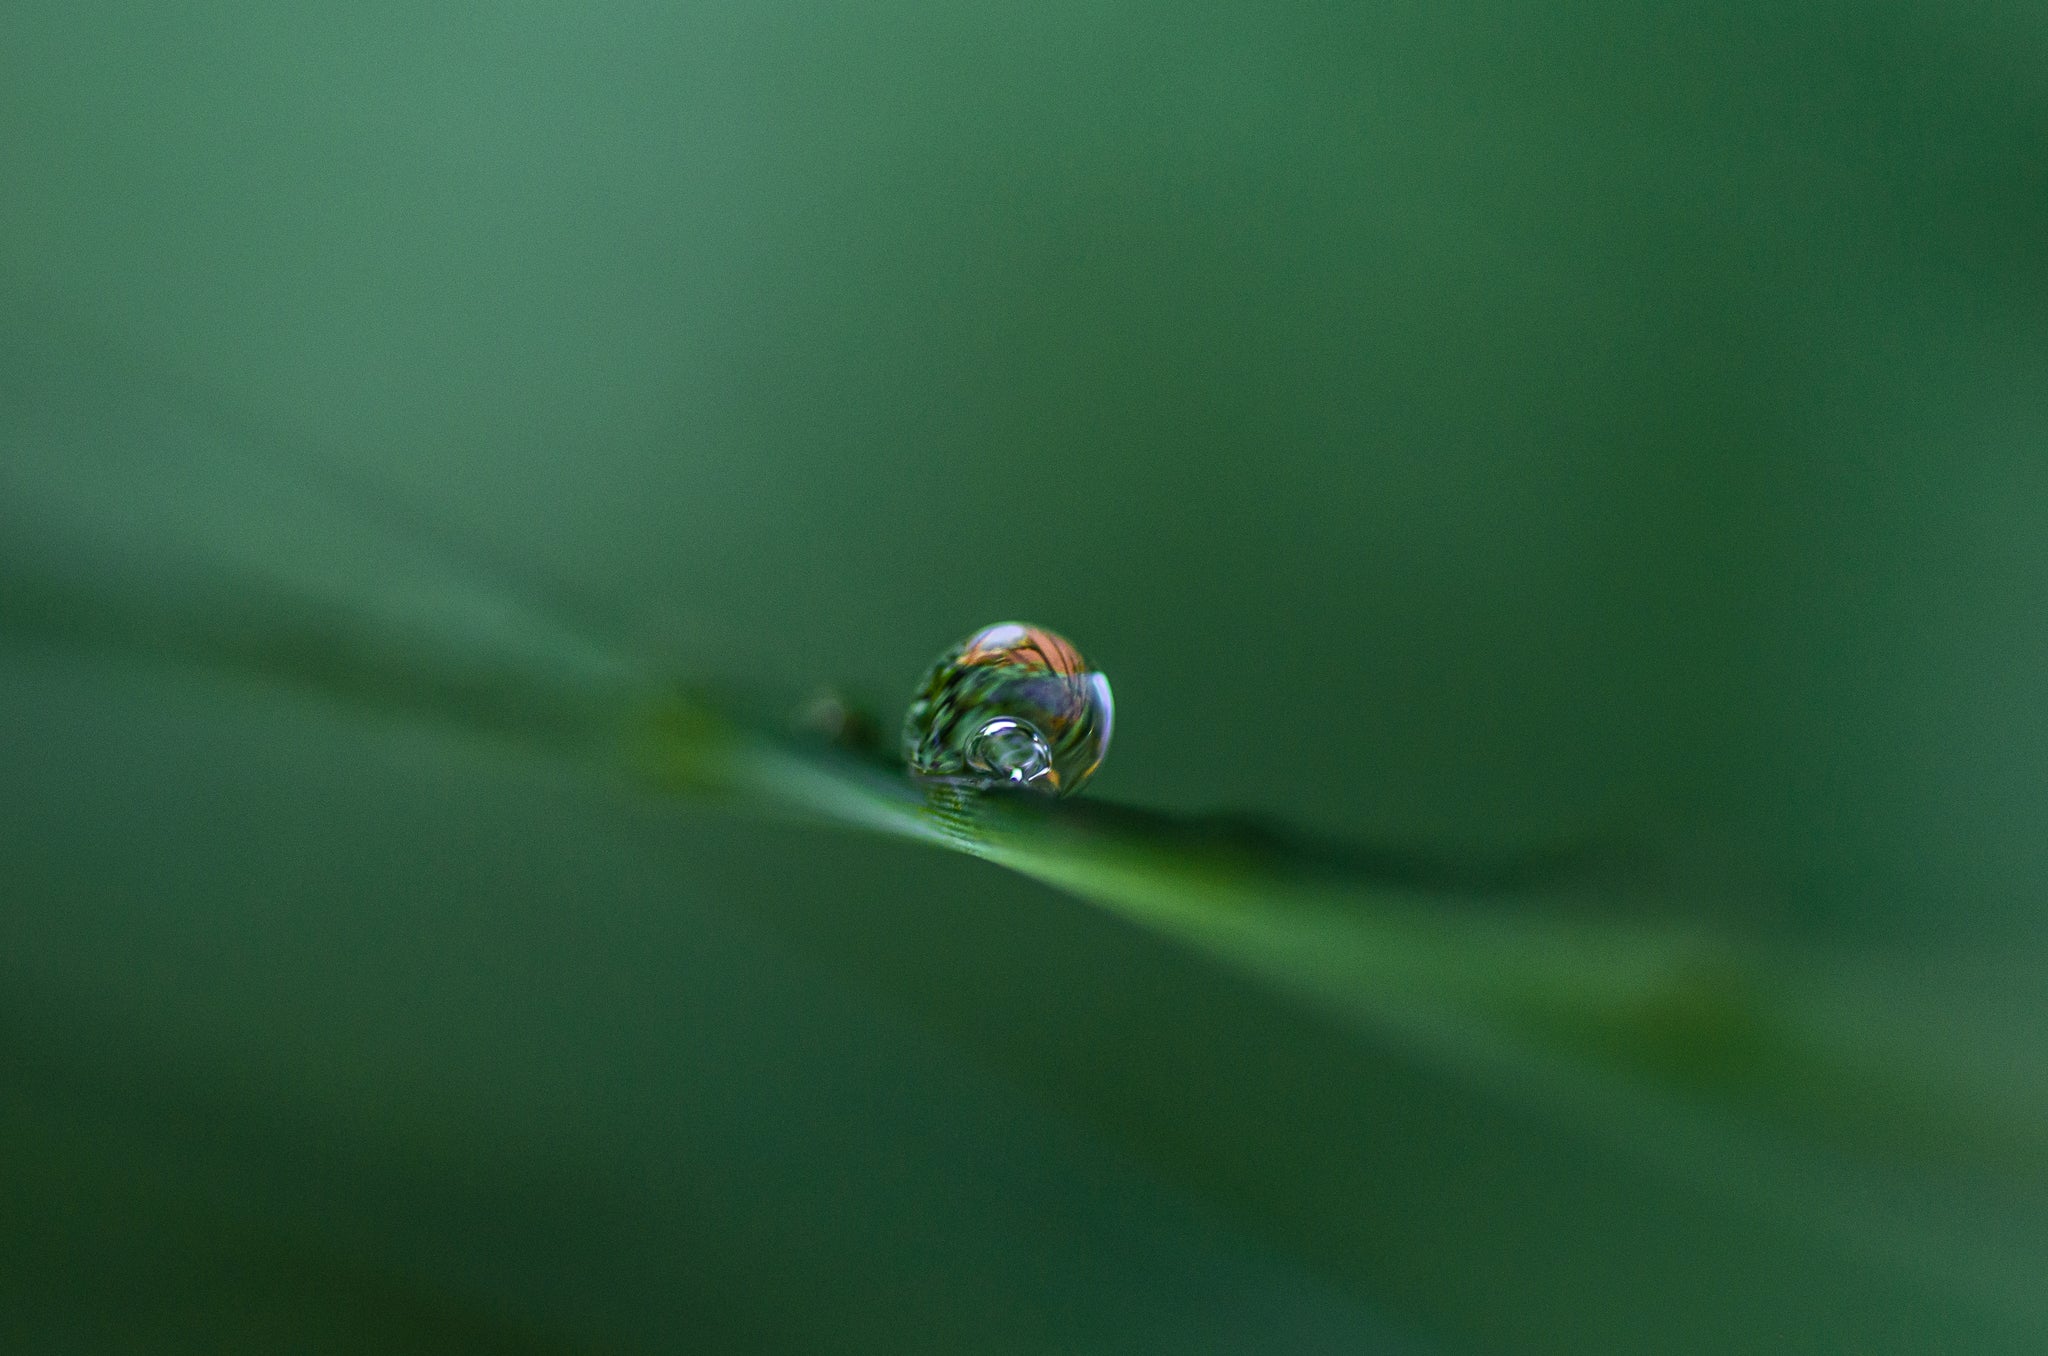 Earth in a Raindrop